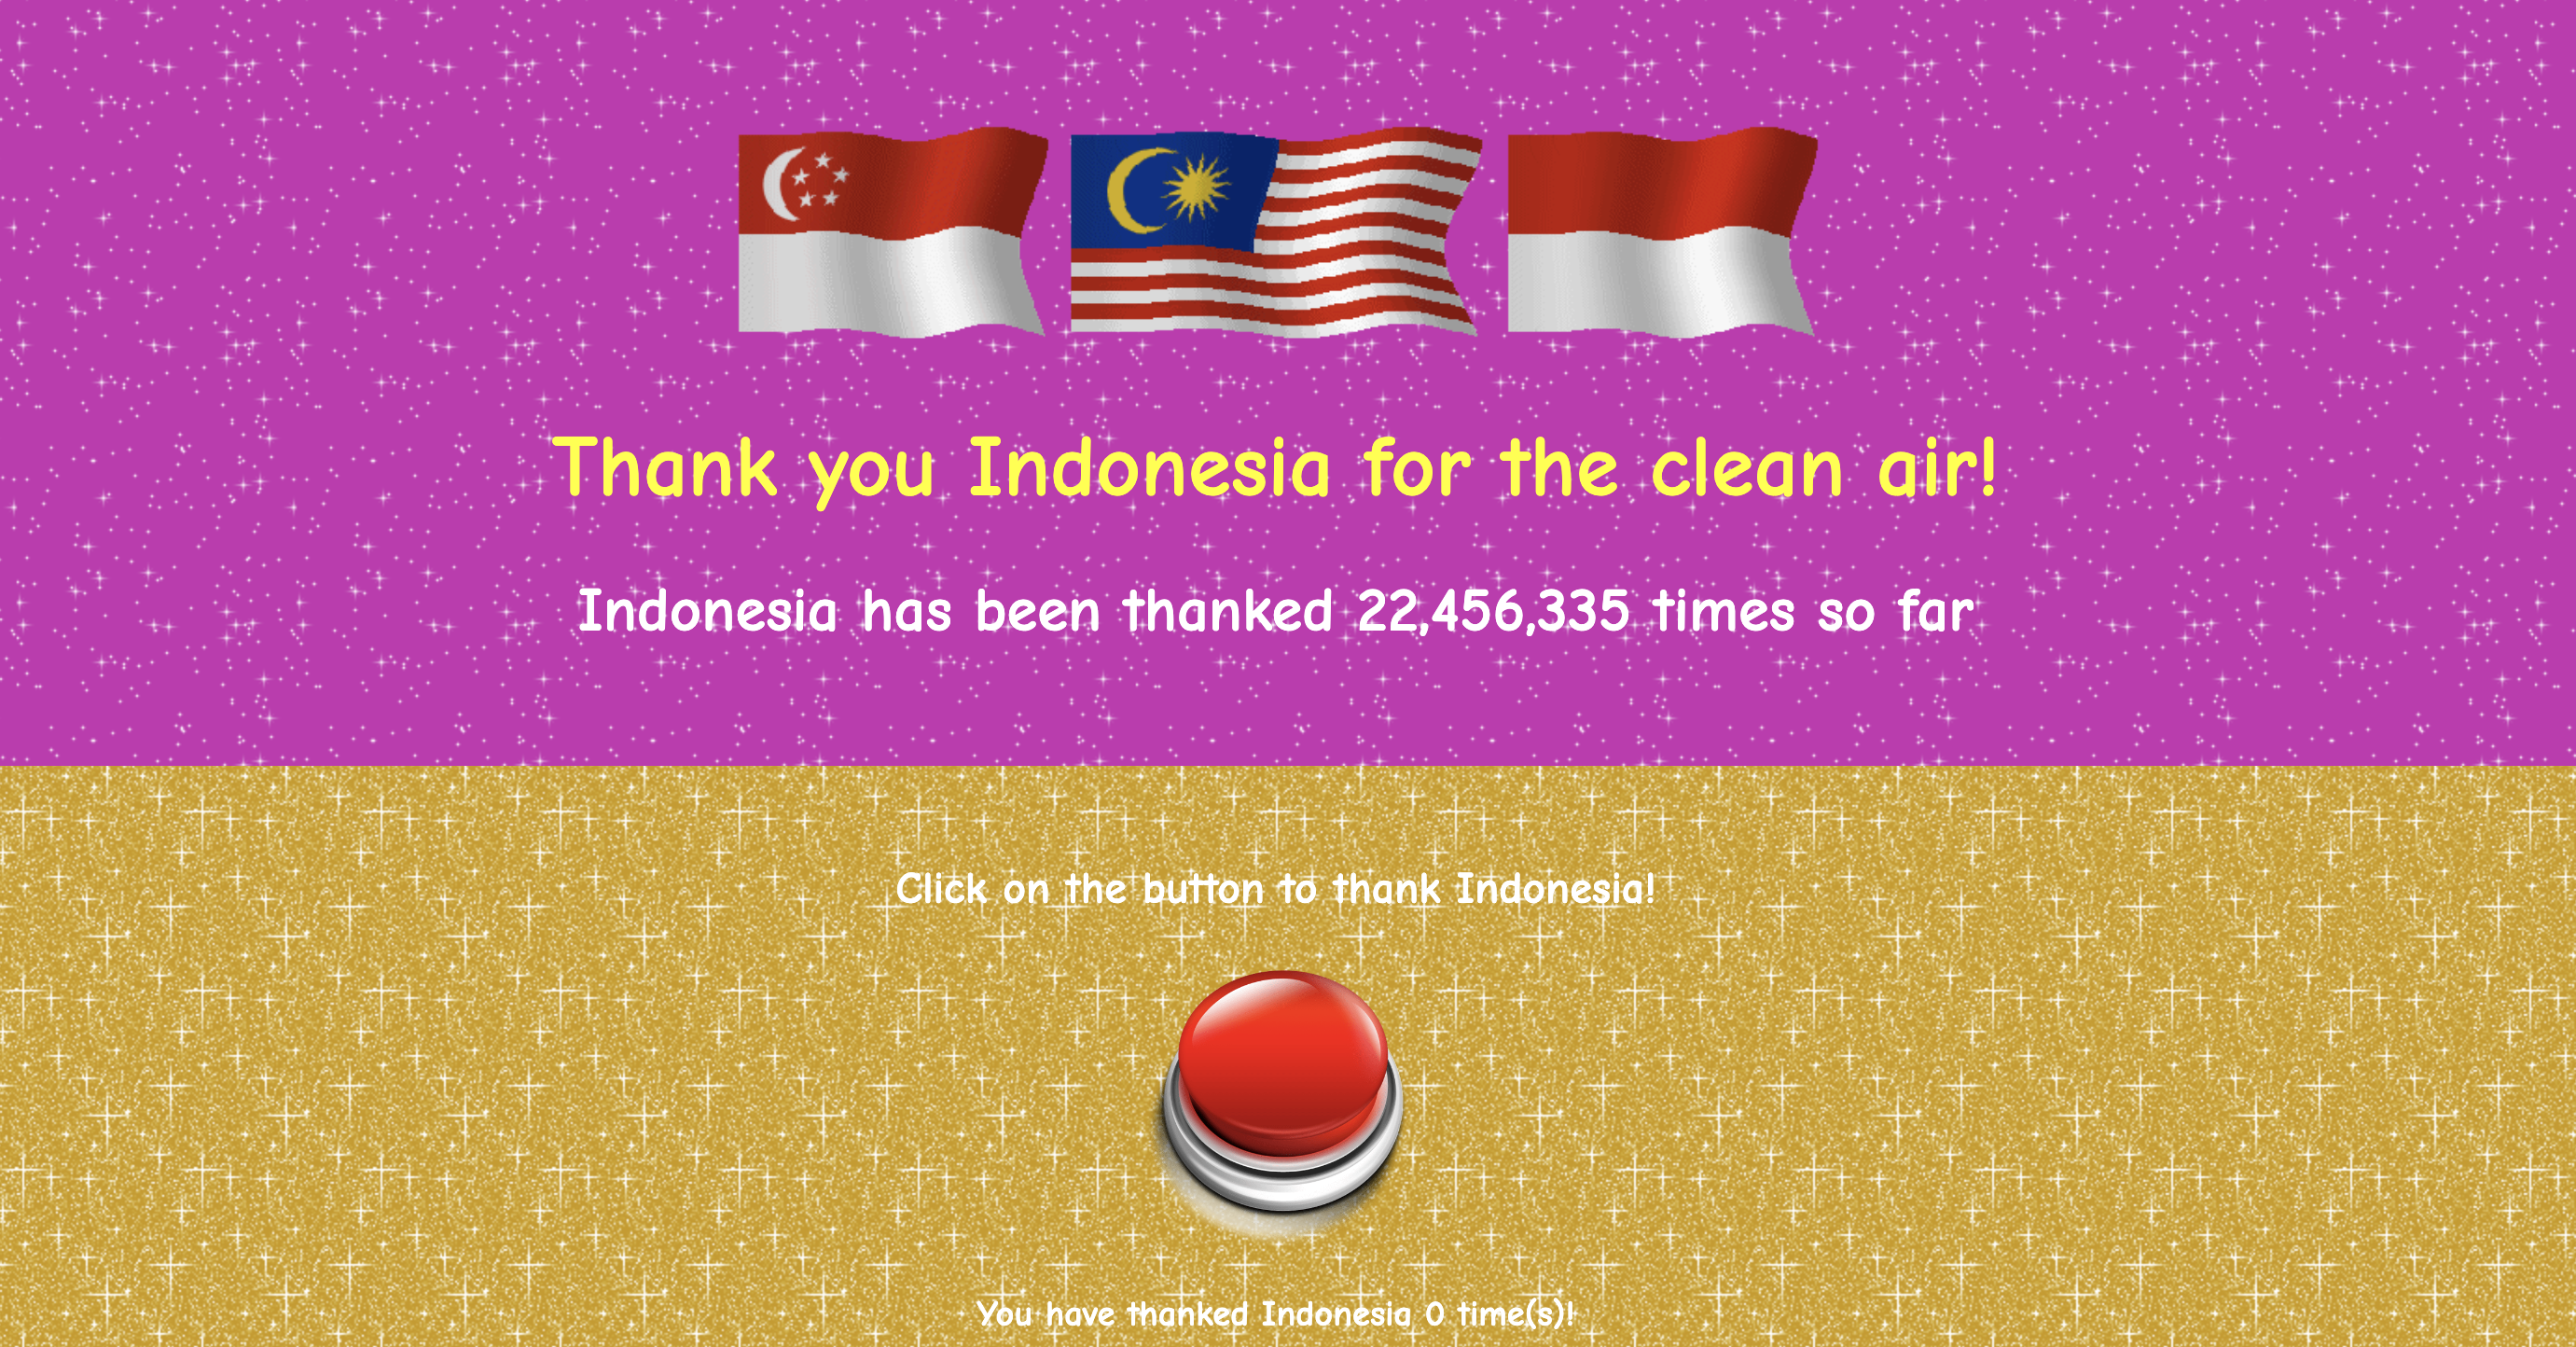 Front page of parody site %22thankyouindoforthecleanair'